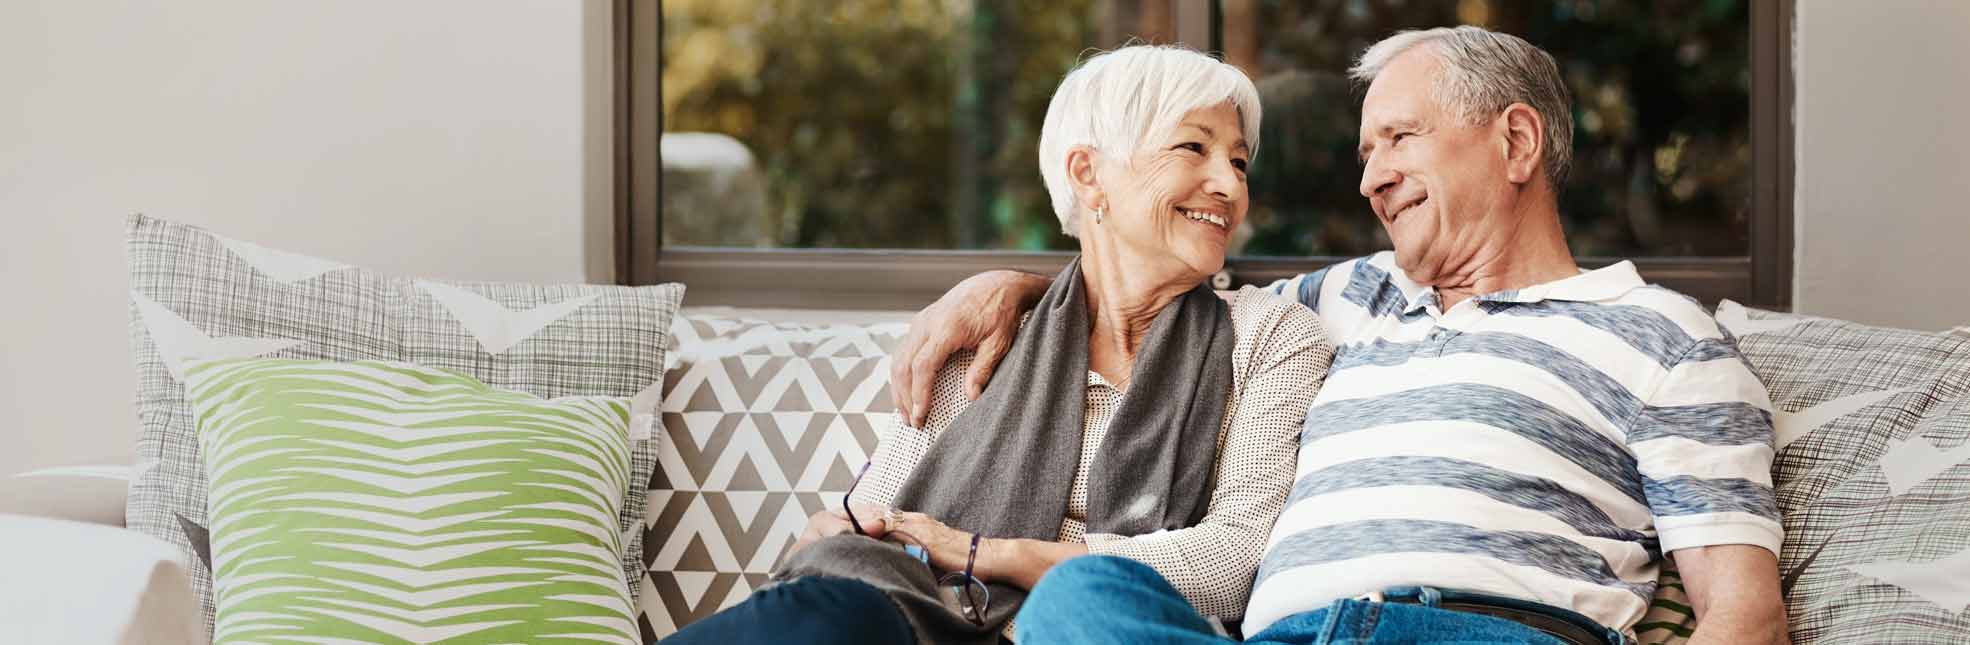 senior couple sitting on couch and smiling